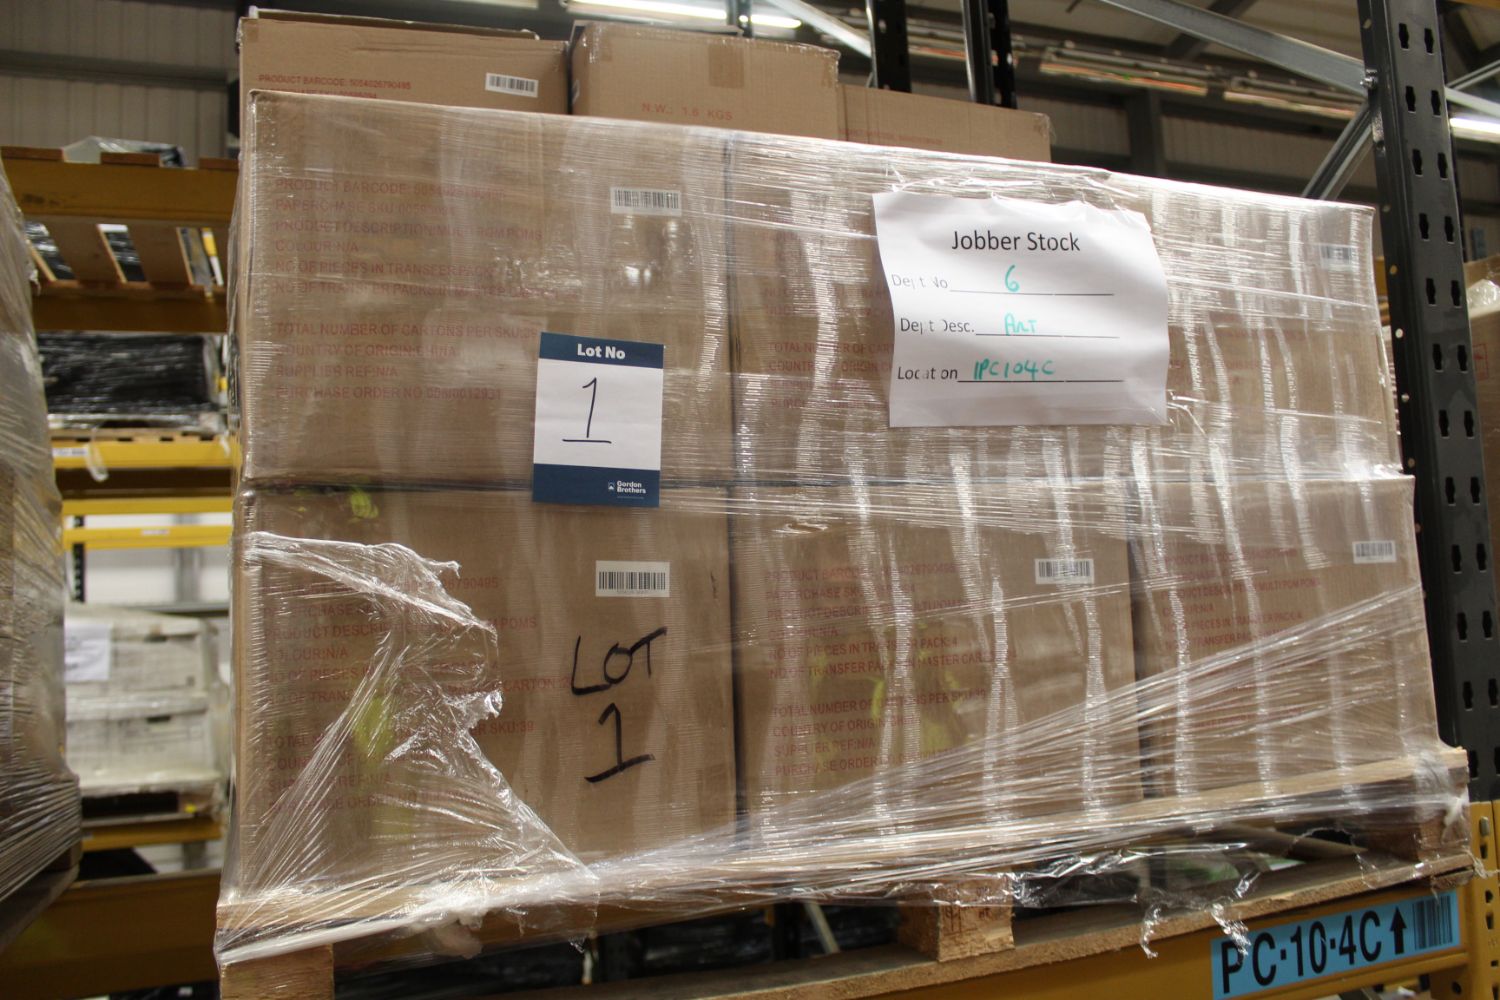 CIRCA 2000 PALLETS OF FORMER PAPERCHASE STOCK; RETAIL VALUE IN EXCESS OF £8M